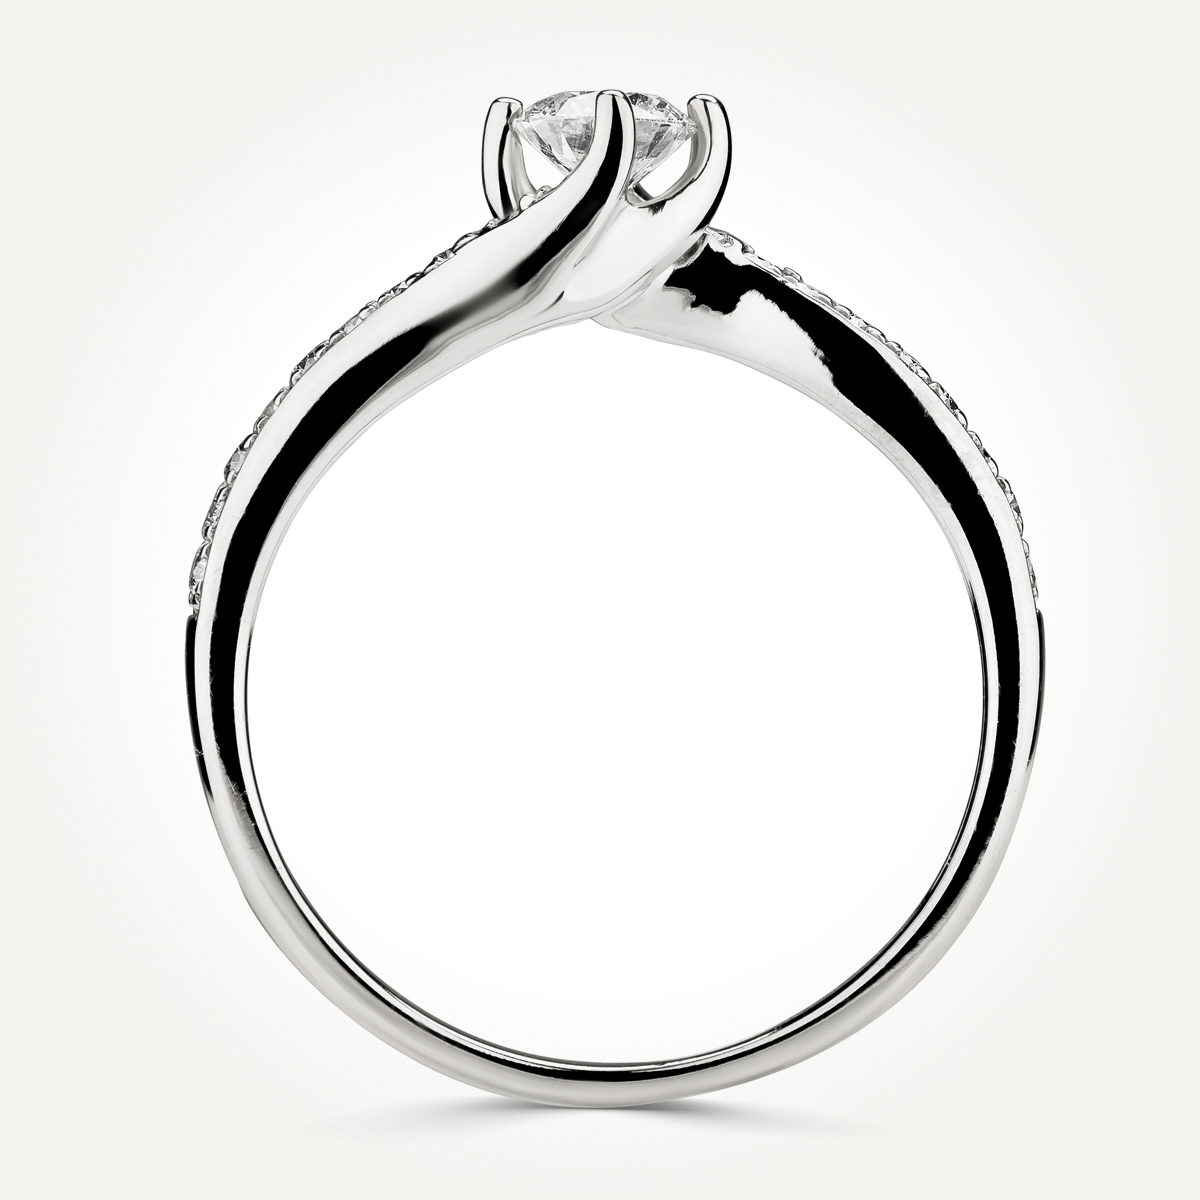 14KT White Gold Twist Band Ring